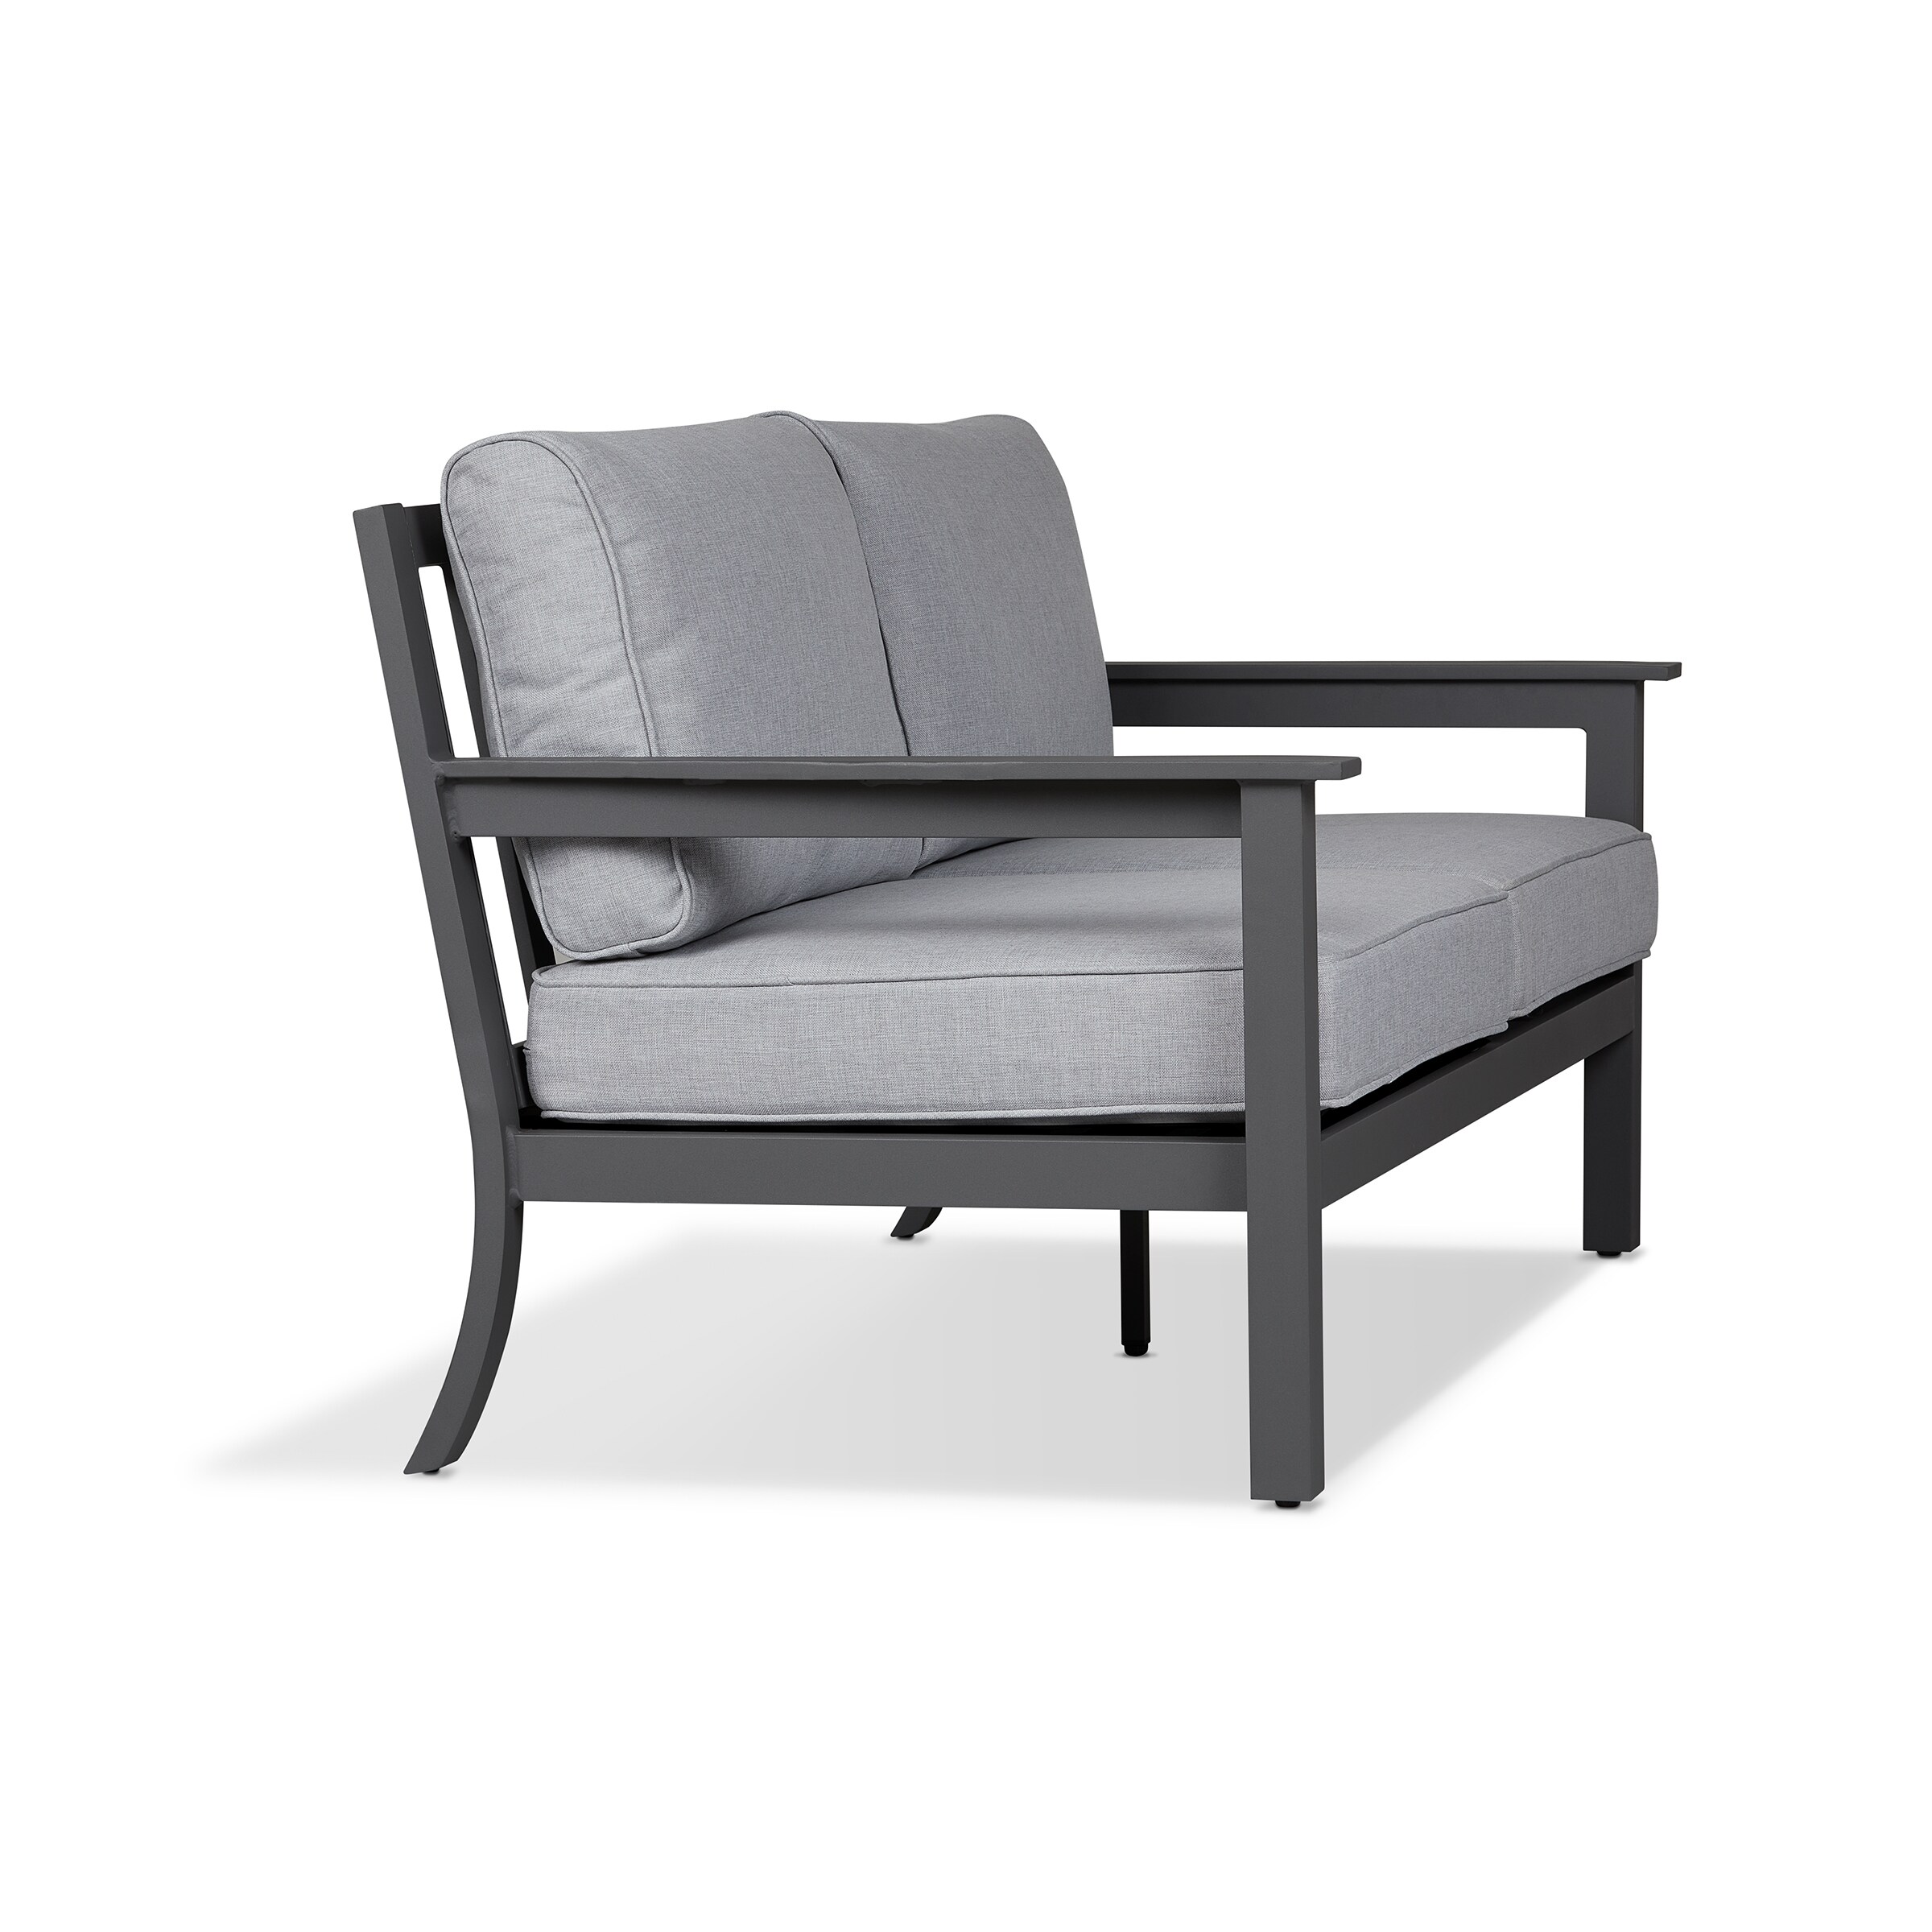 the Outdoor Sofas with Gray Cushions & Gray in in department Sectionals Sofa 2-Seat Flame Real at Ortun Patio Light